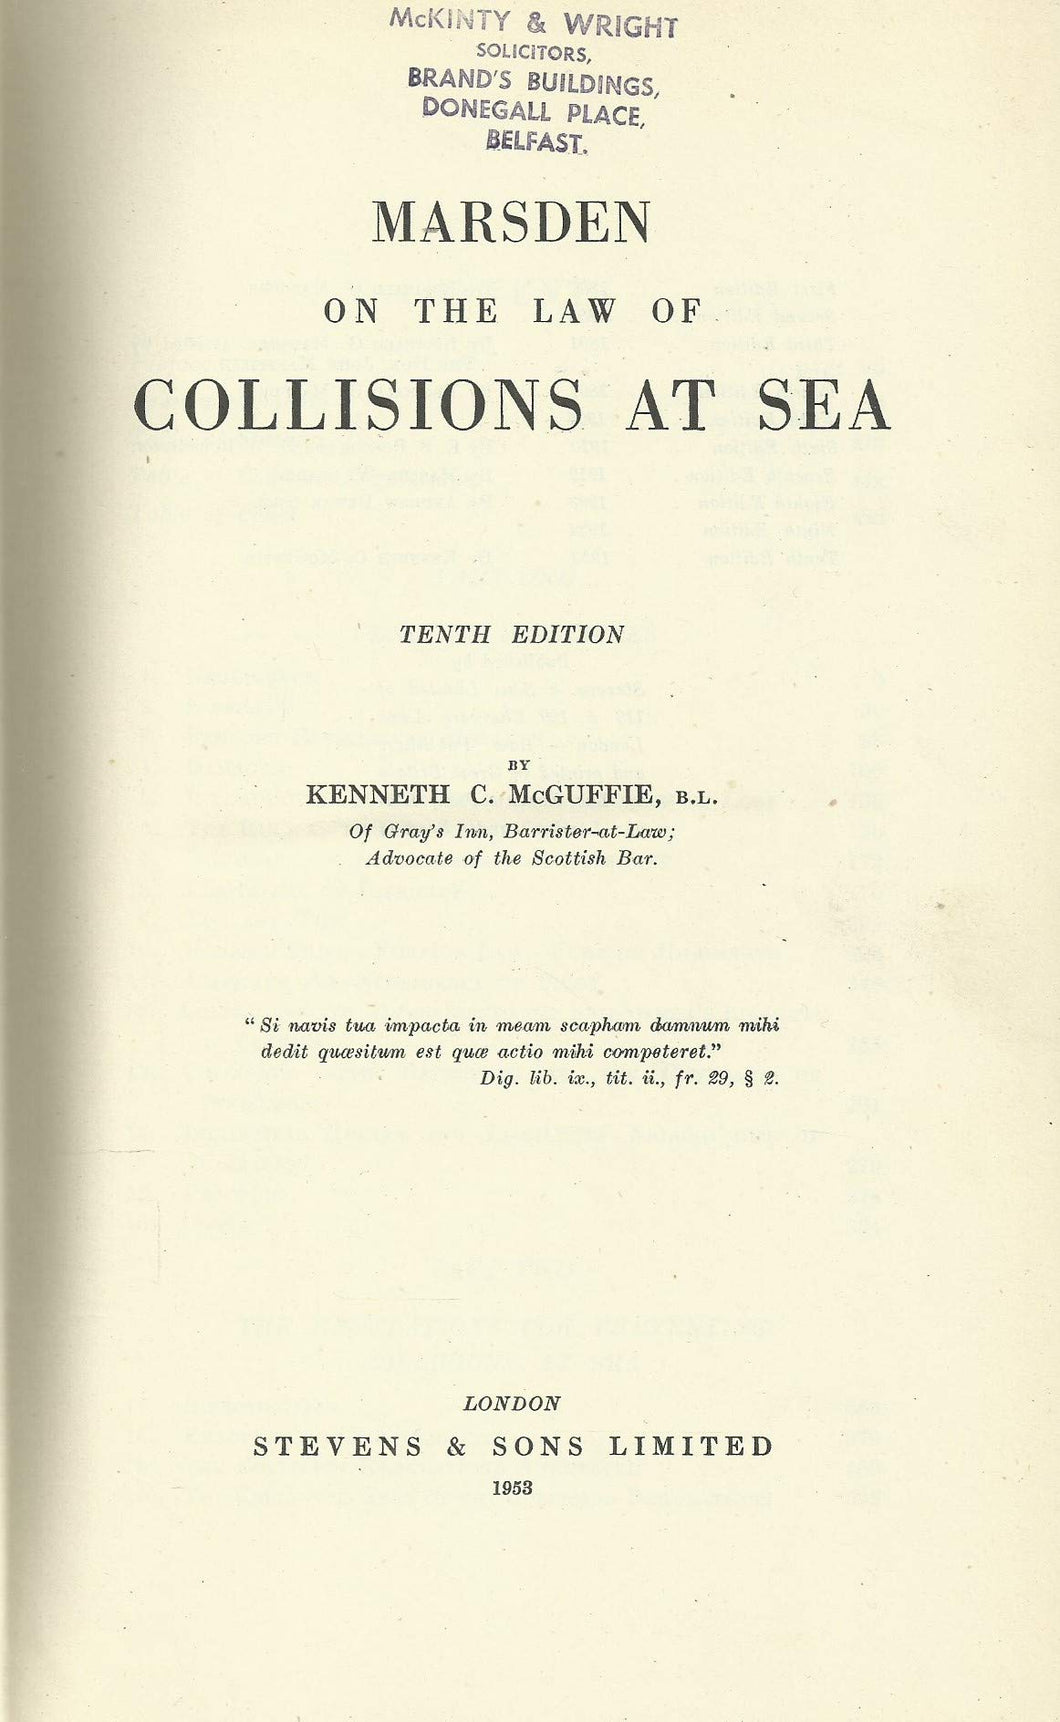 Marsden on the Law of Collisions at Sea - The Library of Shipping Law Number 3 - Tenth Edition